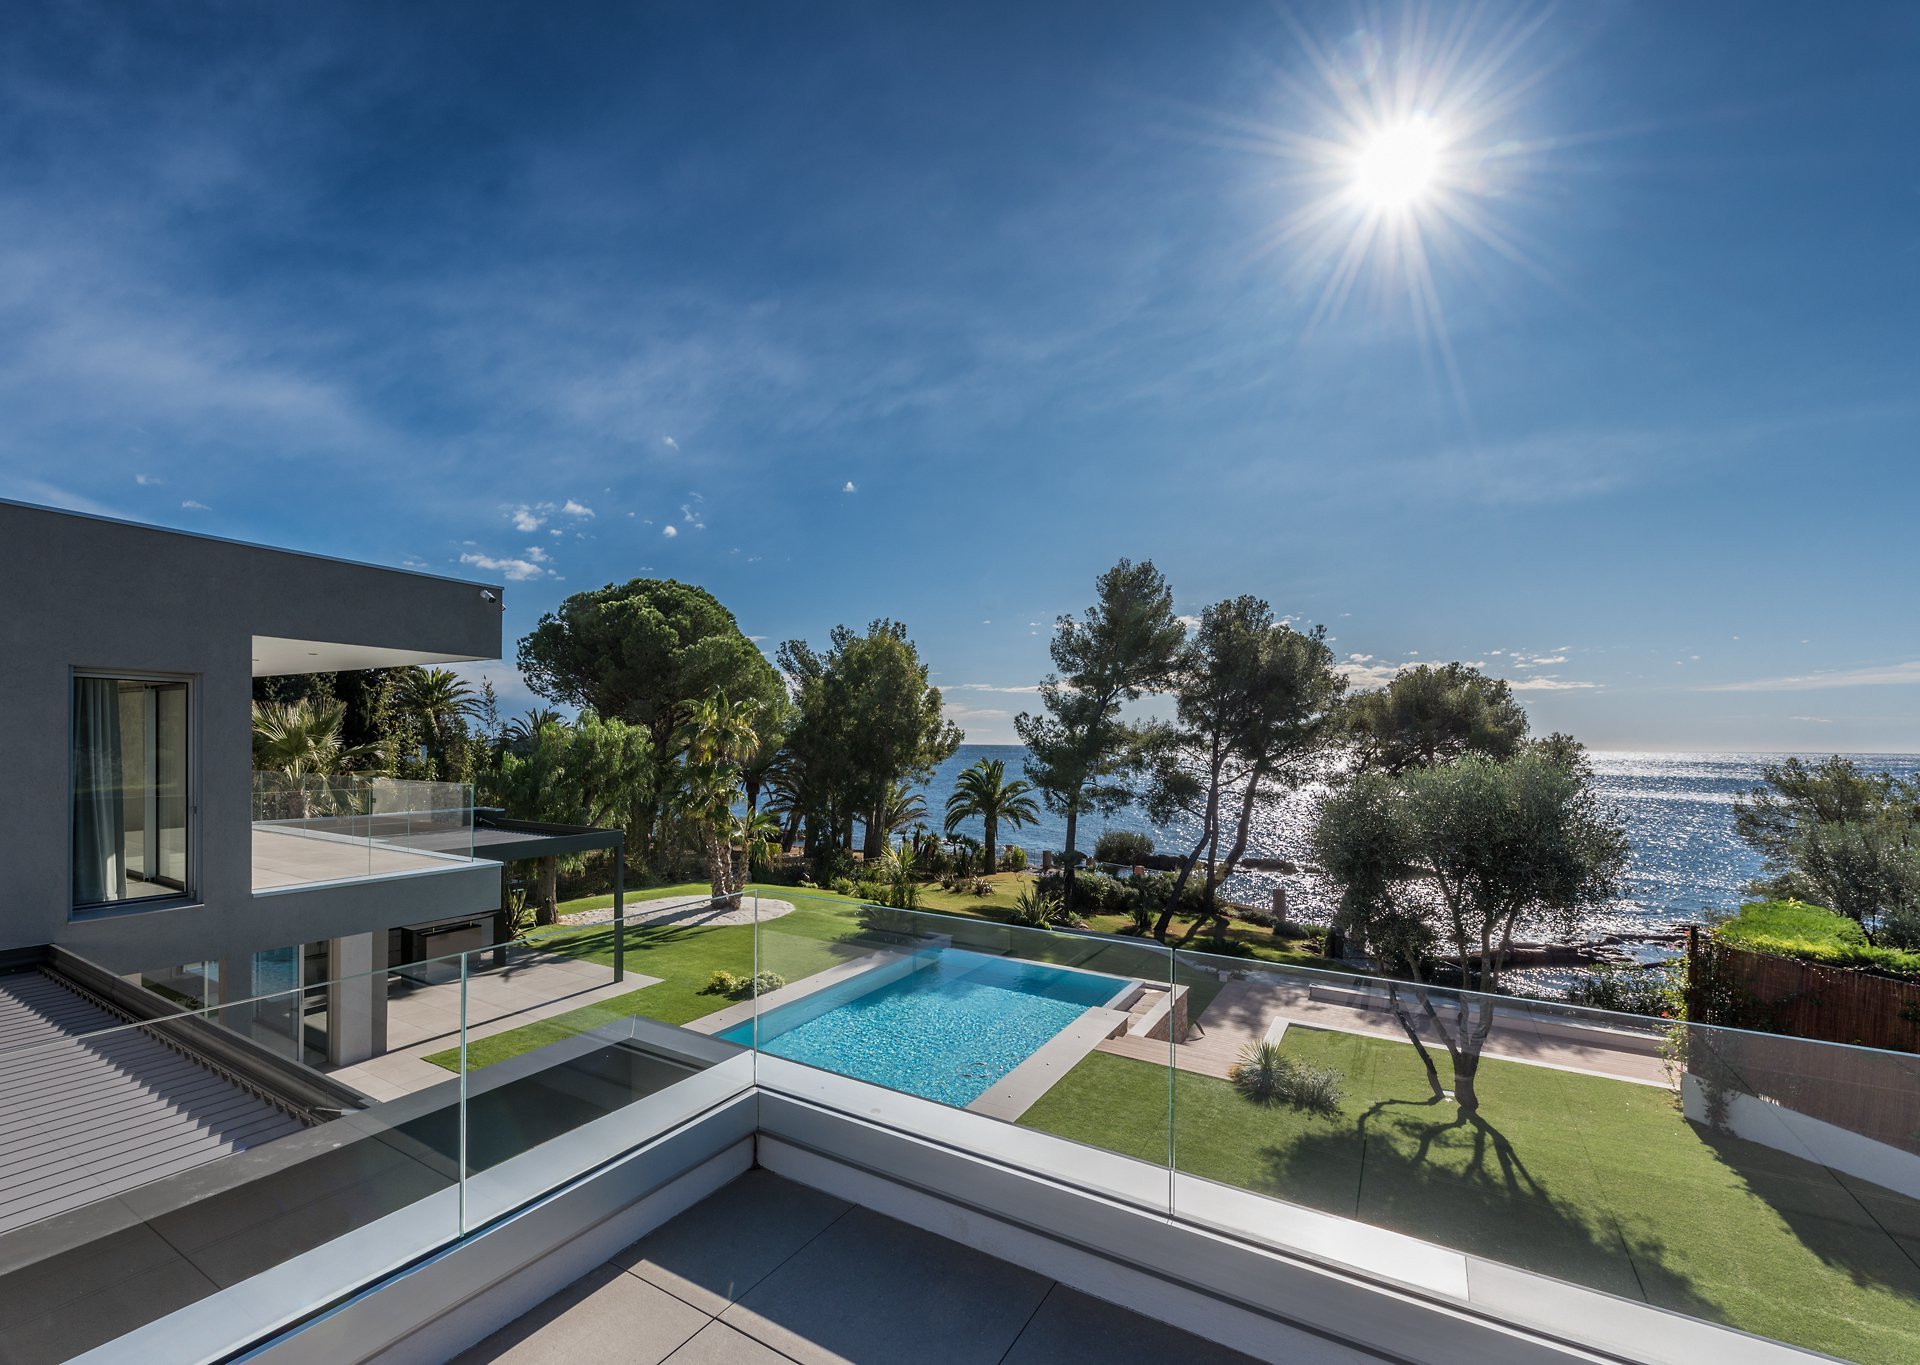 Contemporary seafront villa located between Cannes and Saint Tropez